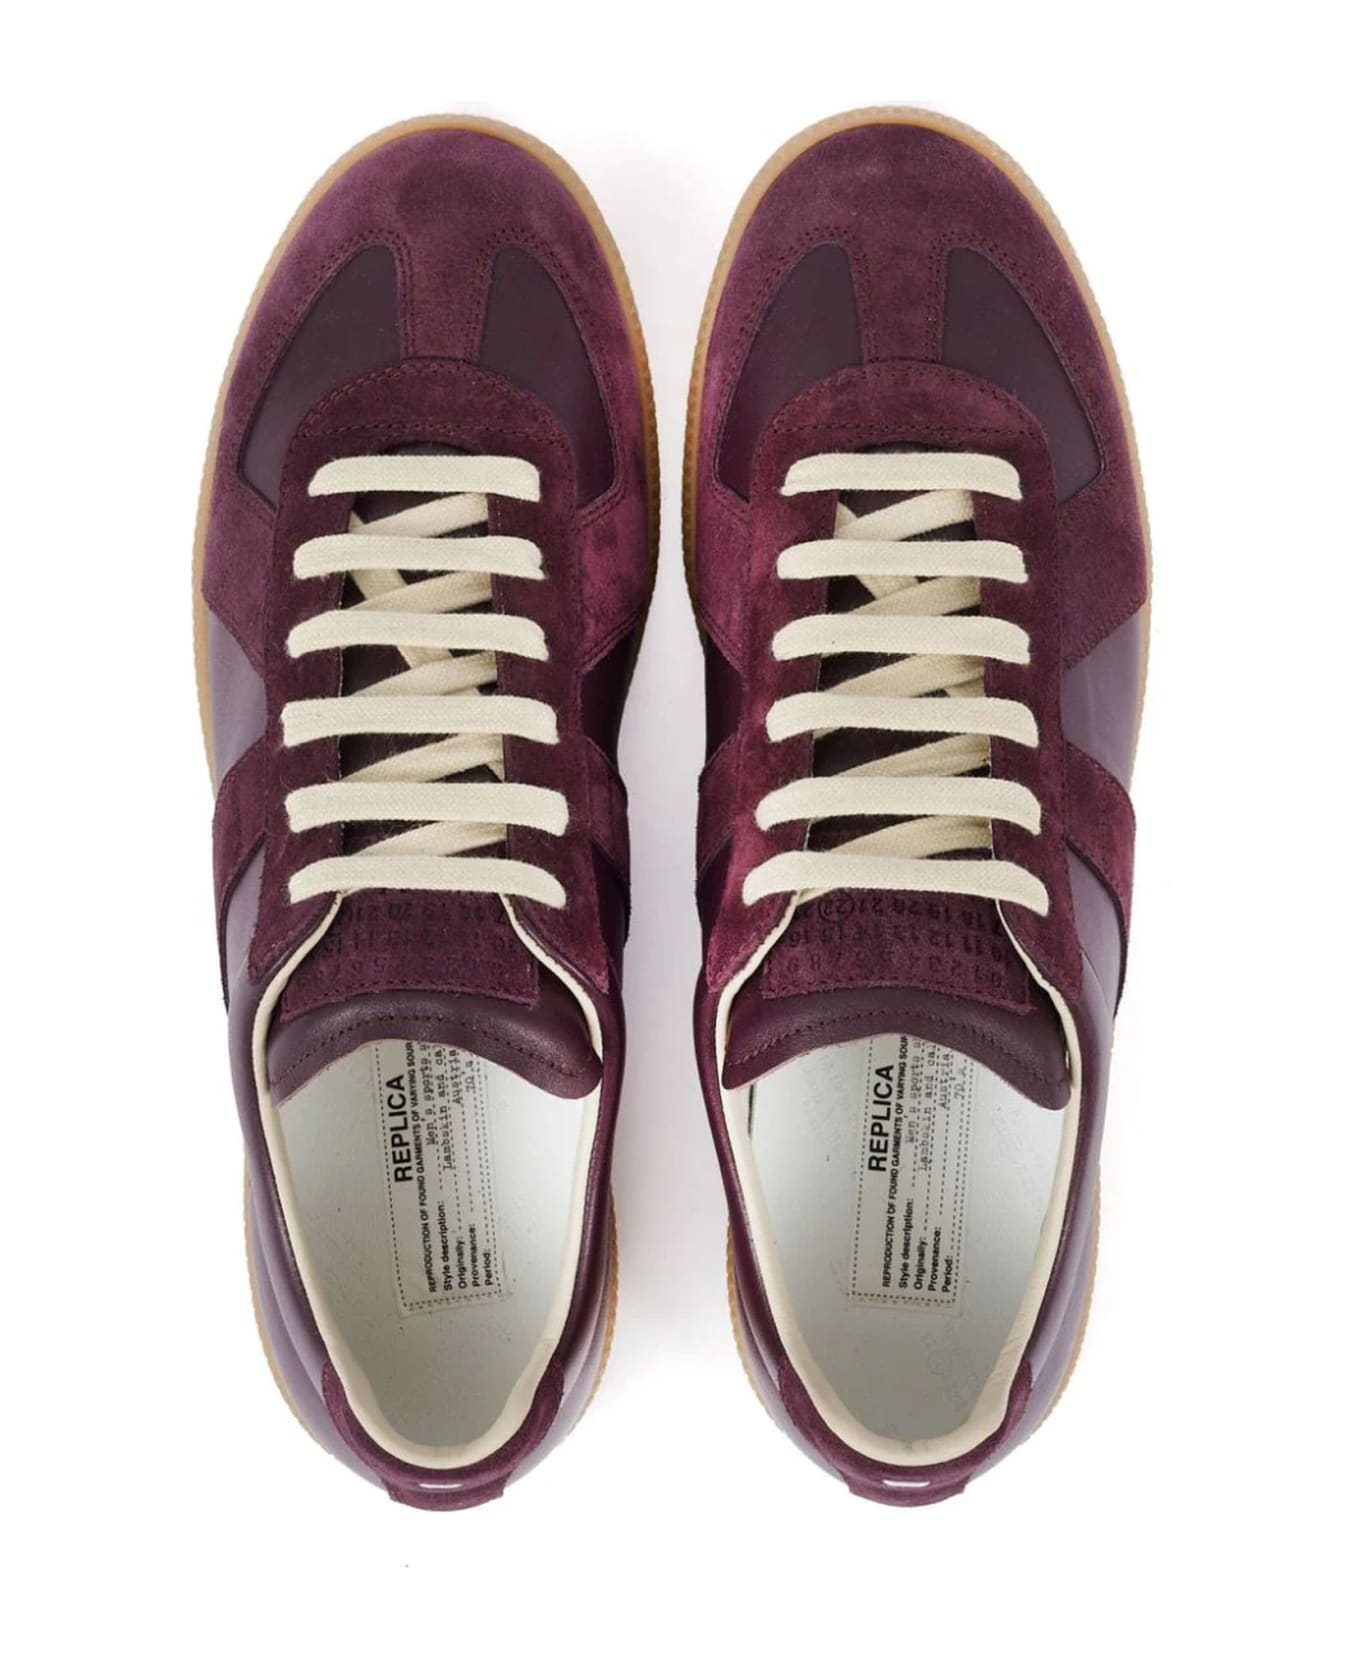 Maison Margiela Sneakers - Red